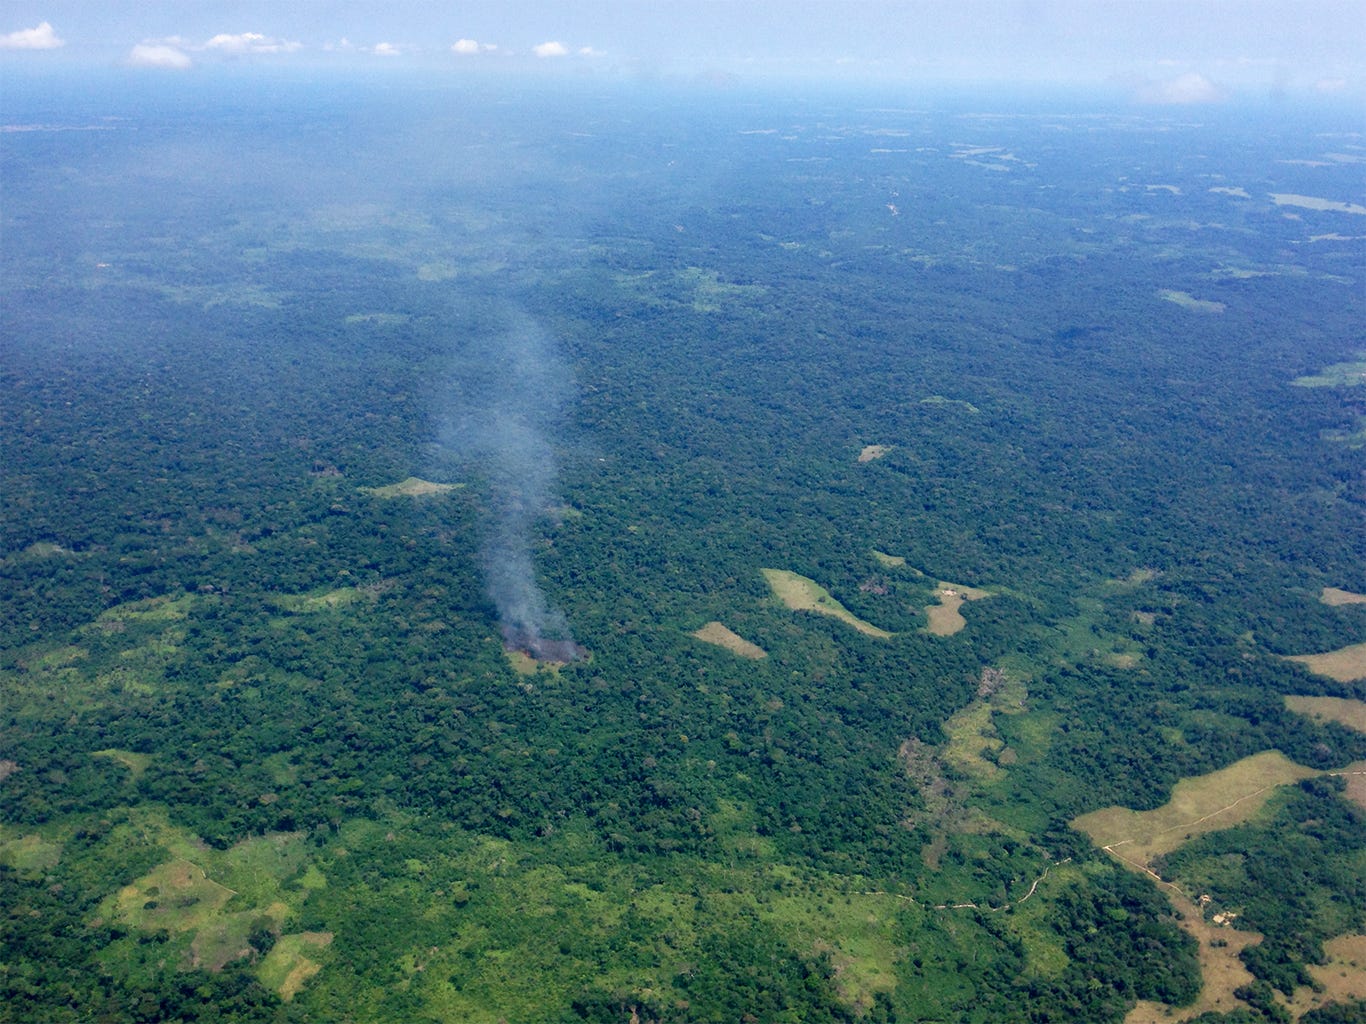 Land clearance with fire in the Congo Basin. 